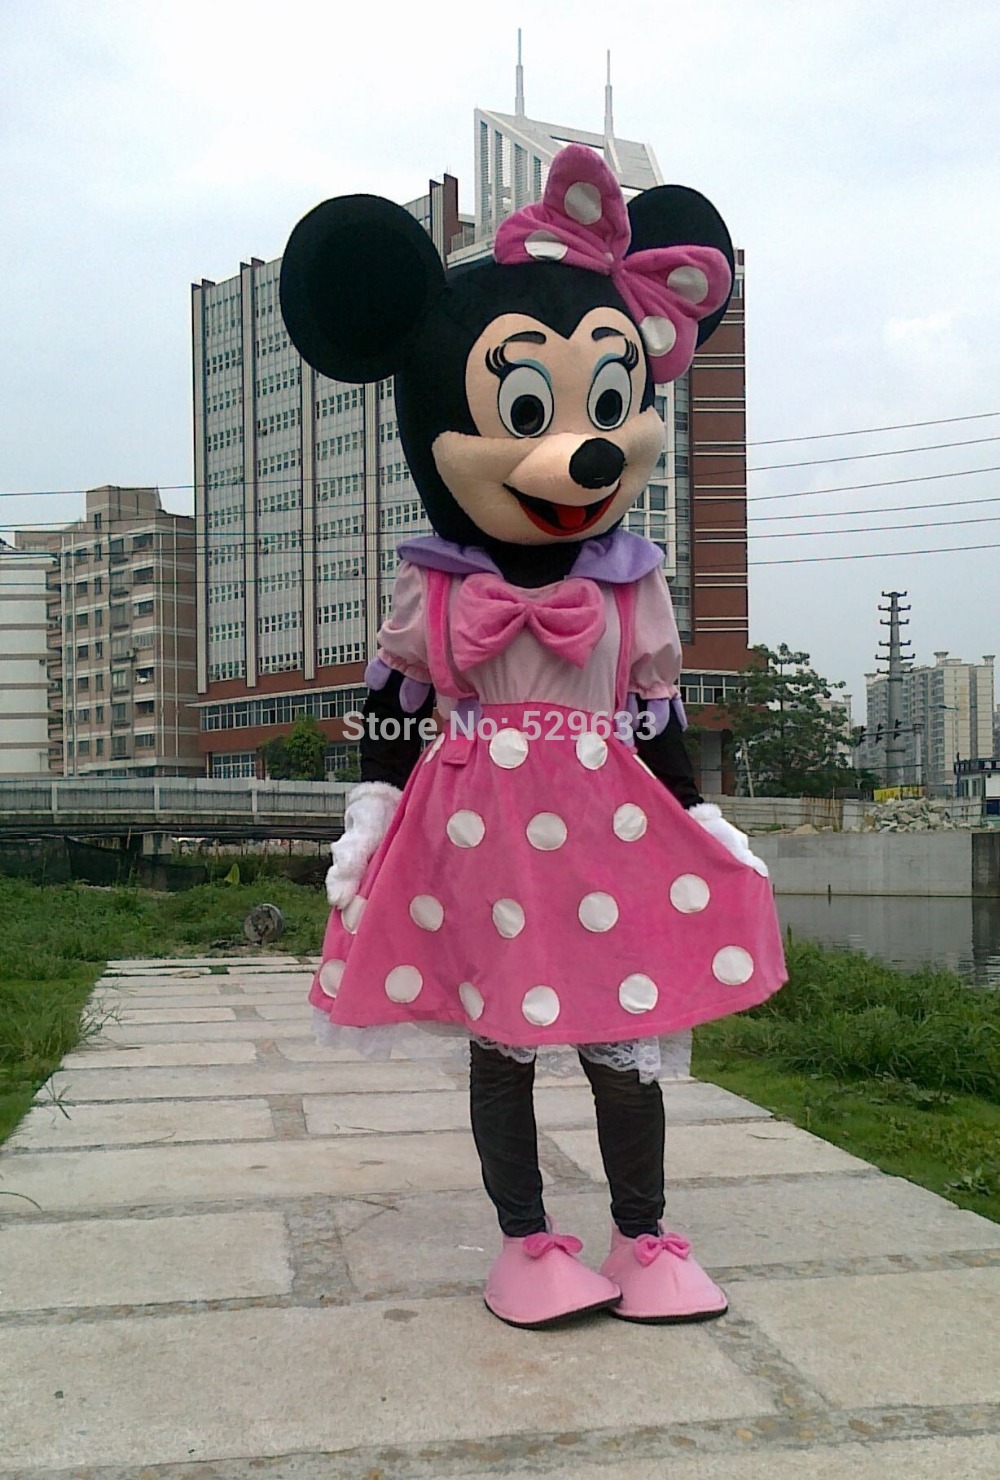 Hot Sales Adult Party Dress Version Minnie Mascot Costume Pink Minnie Mouse Mascot Costume Free Shipping